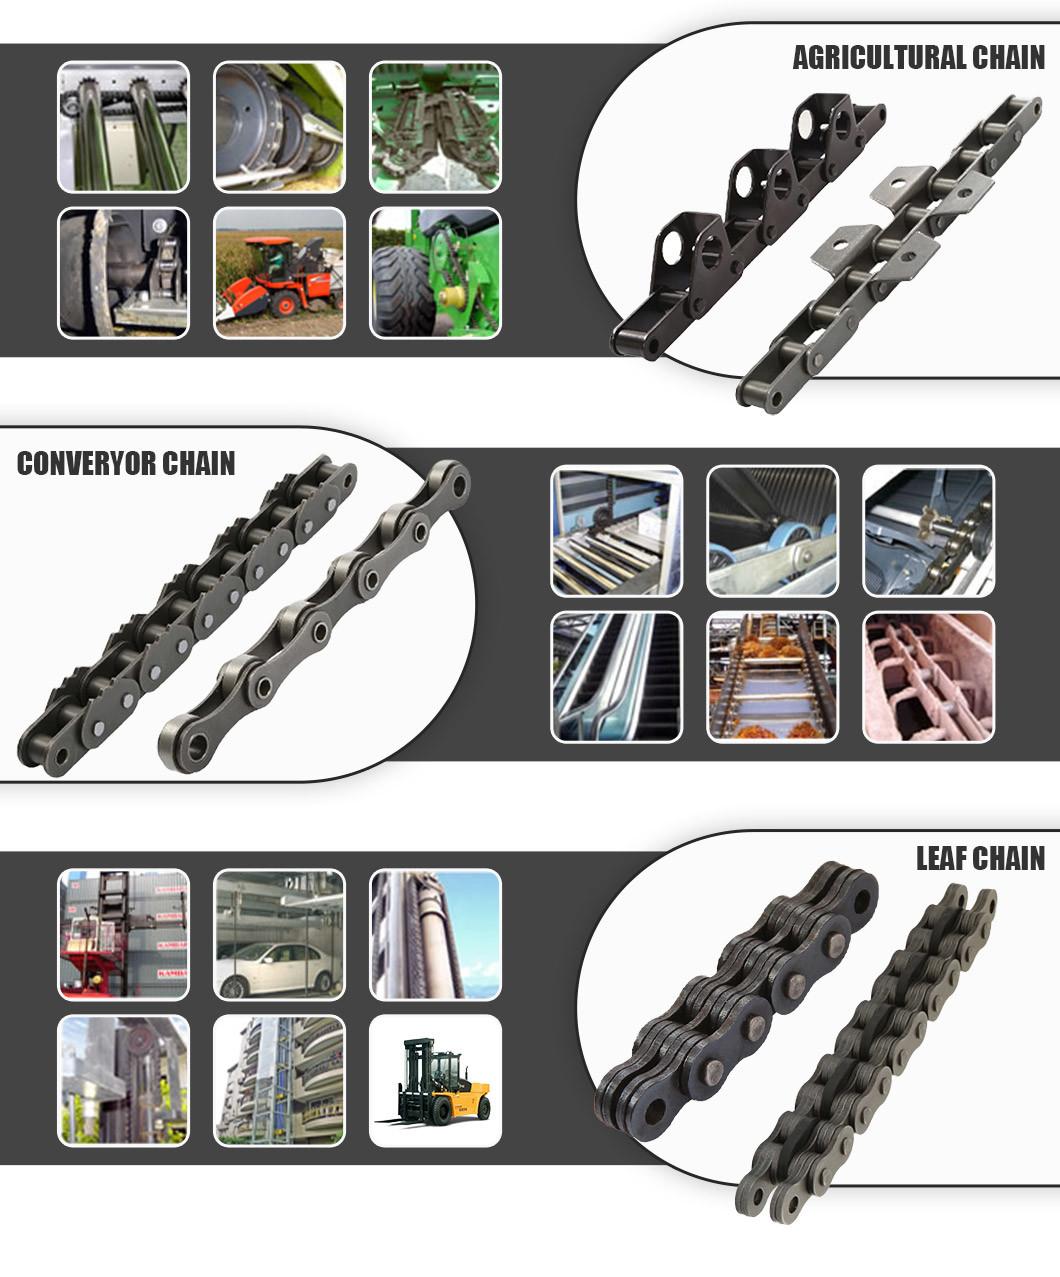 Made-to-Order Ca620A1f1, Ca550K1f6 Farmland Infrastructure Agricultural Chain